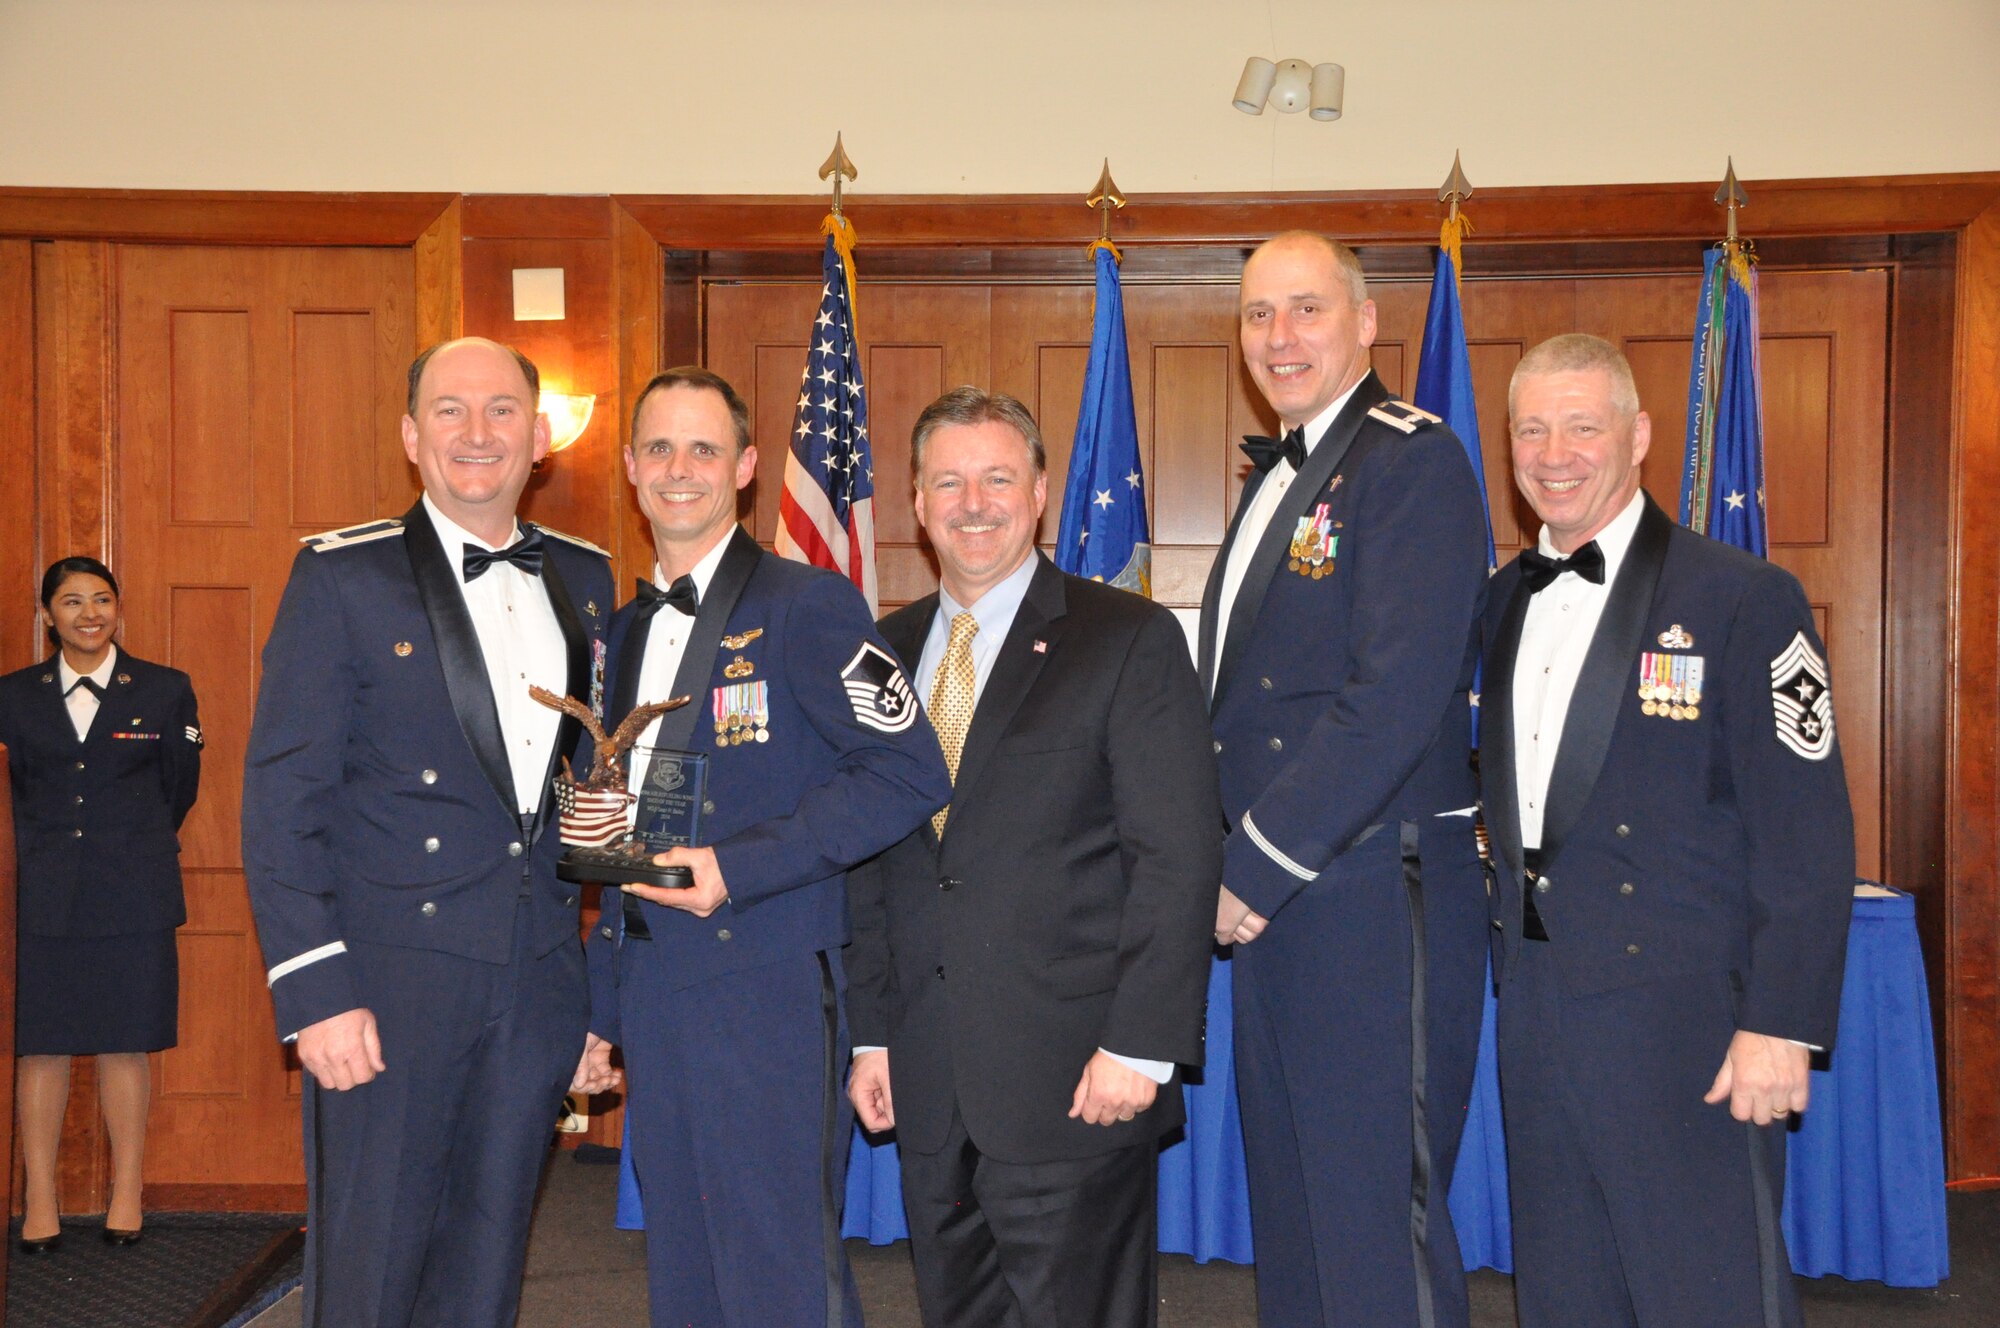 Master Sgt. Sean Bailey, 459th Aircraft Maintenance Squadron, wins the Senior Non-Commissioned Officer of the Year award at the 459 ARW Annual Awards Banquet on Saturday, March 7, 2015. (Air Force Photo / SrA Kristin Kurtz)